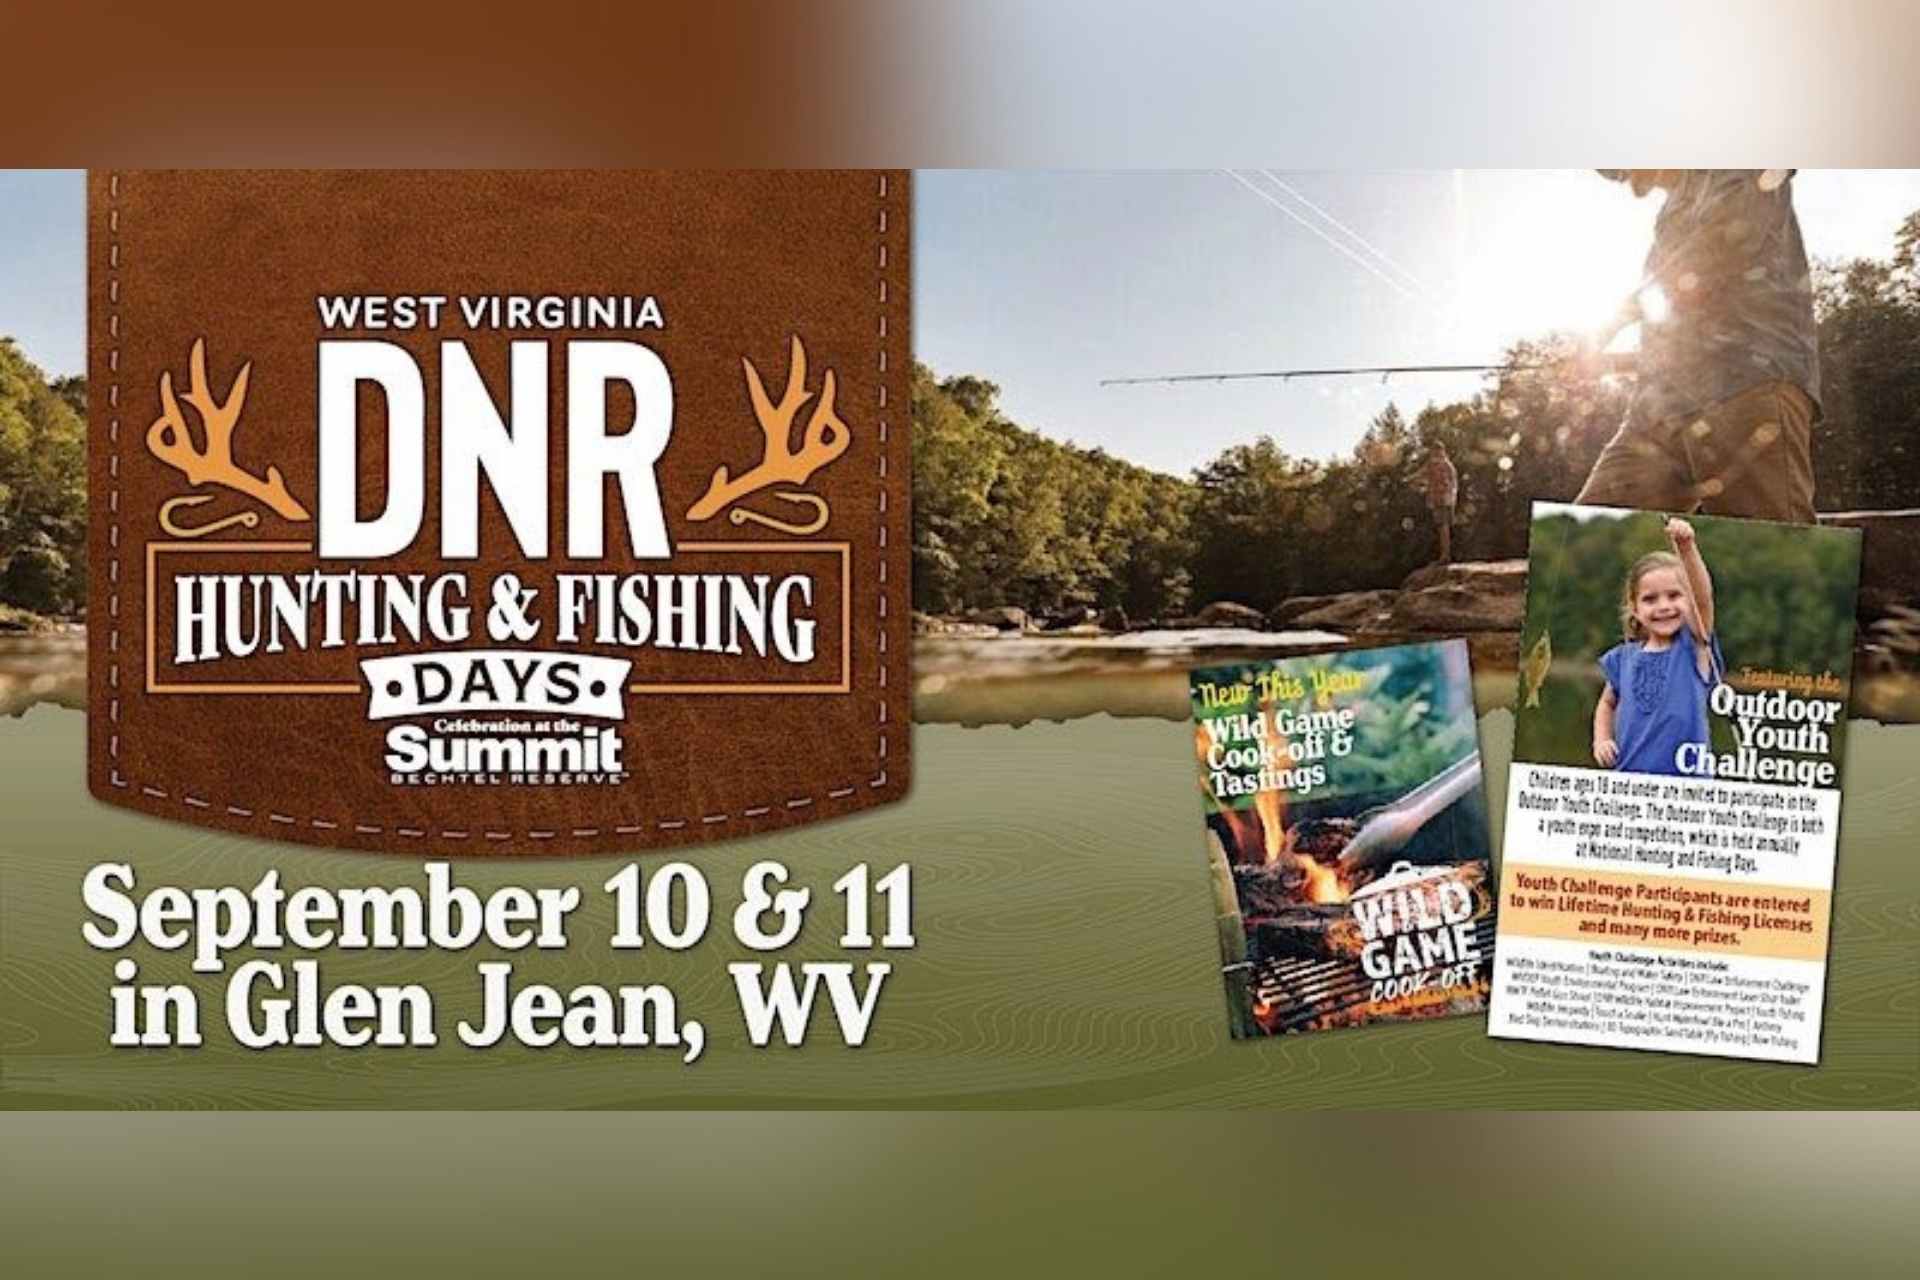 National Hunting and Fishing Days Celebration to be held at Summit